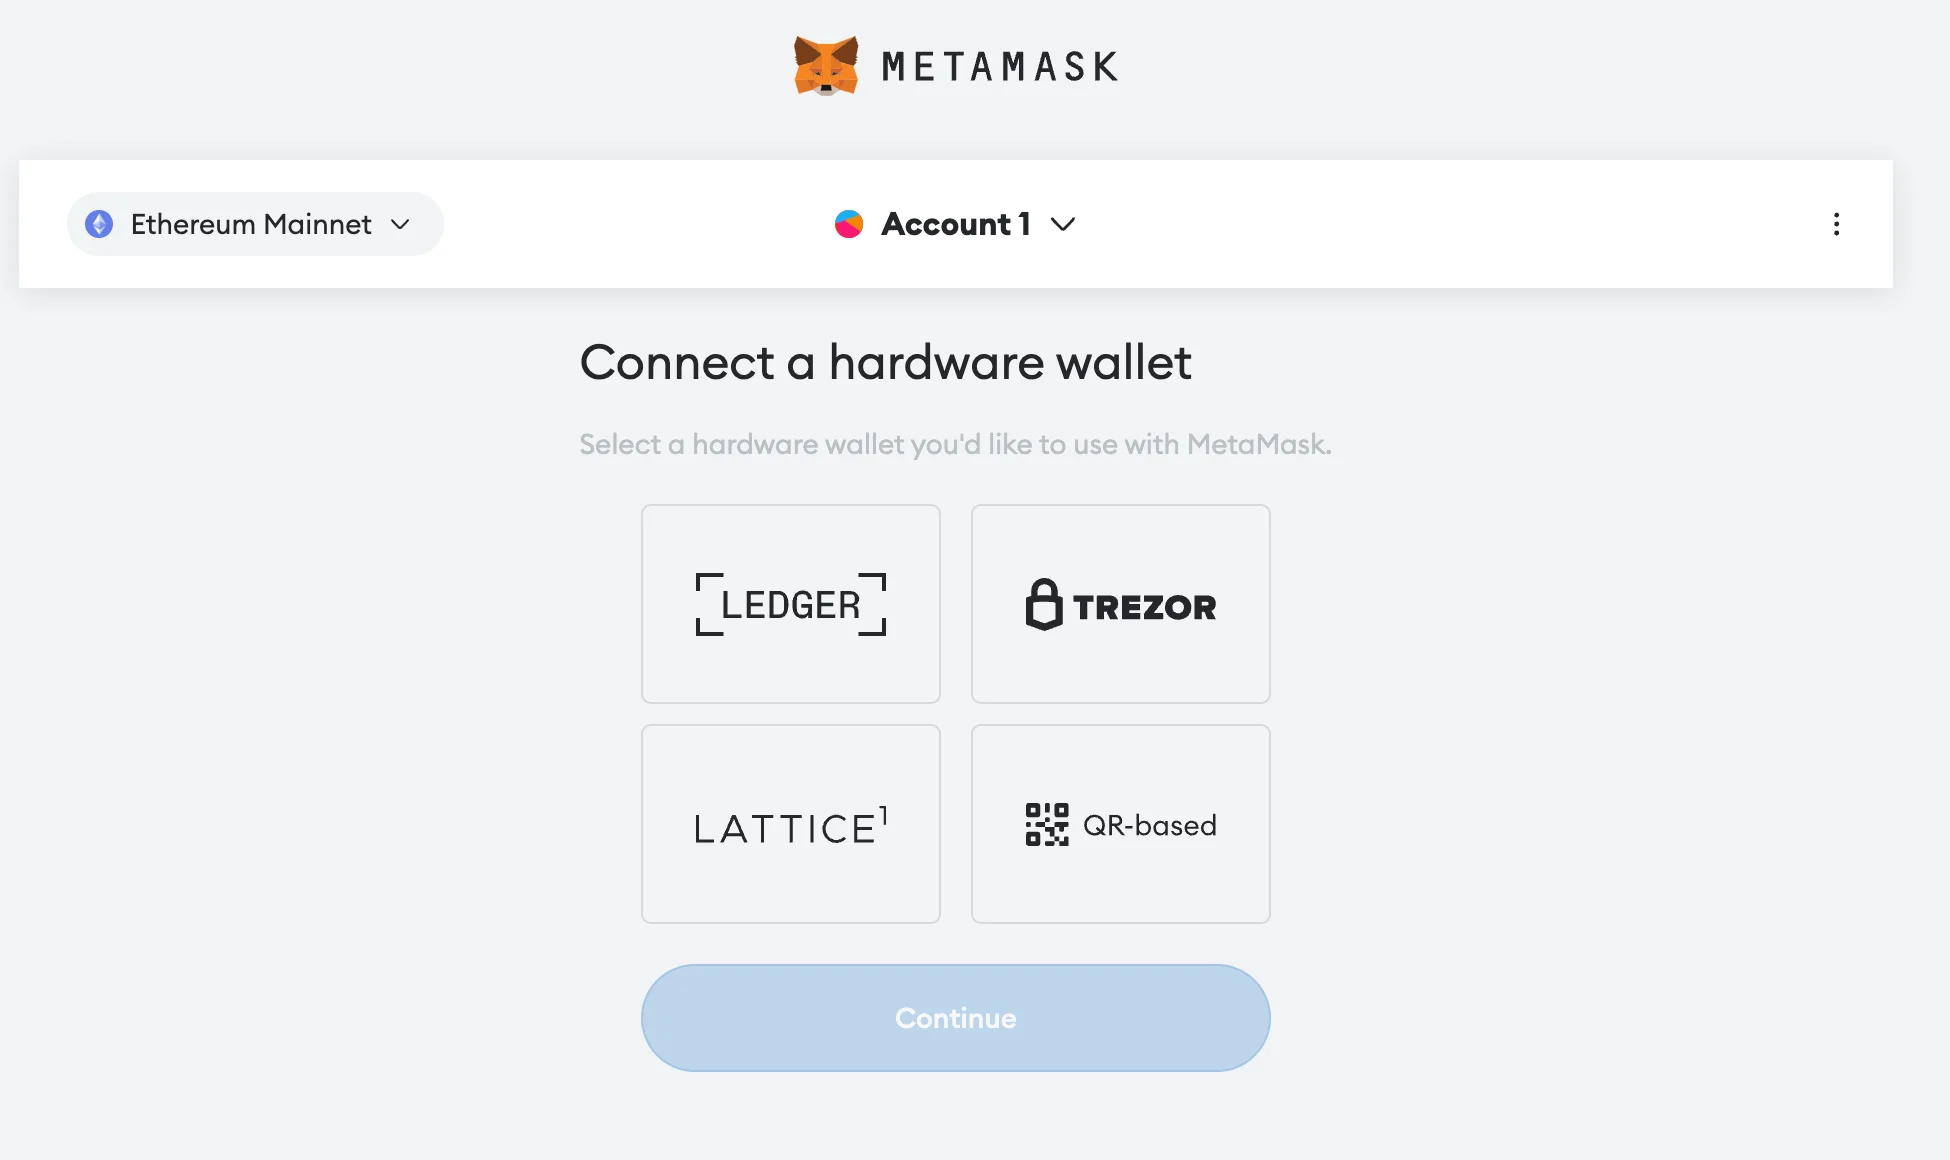 Security Features of Ledger and MetaMask